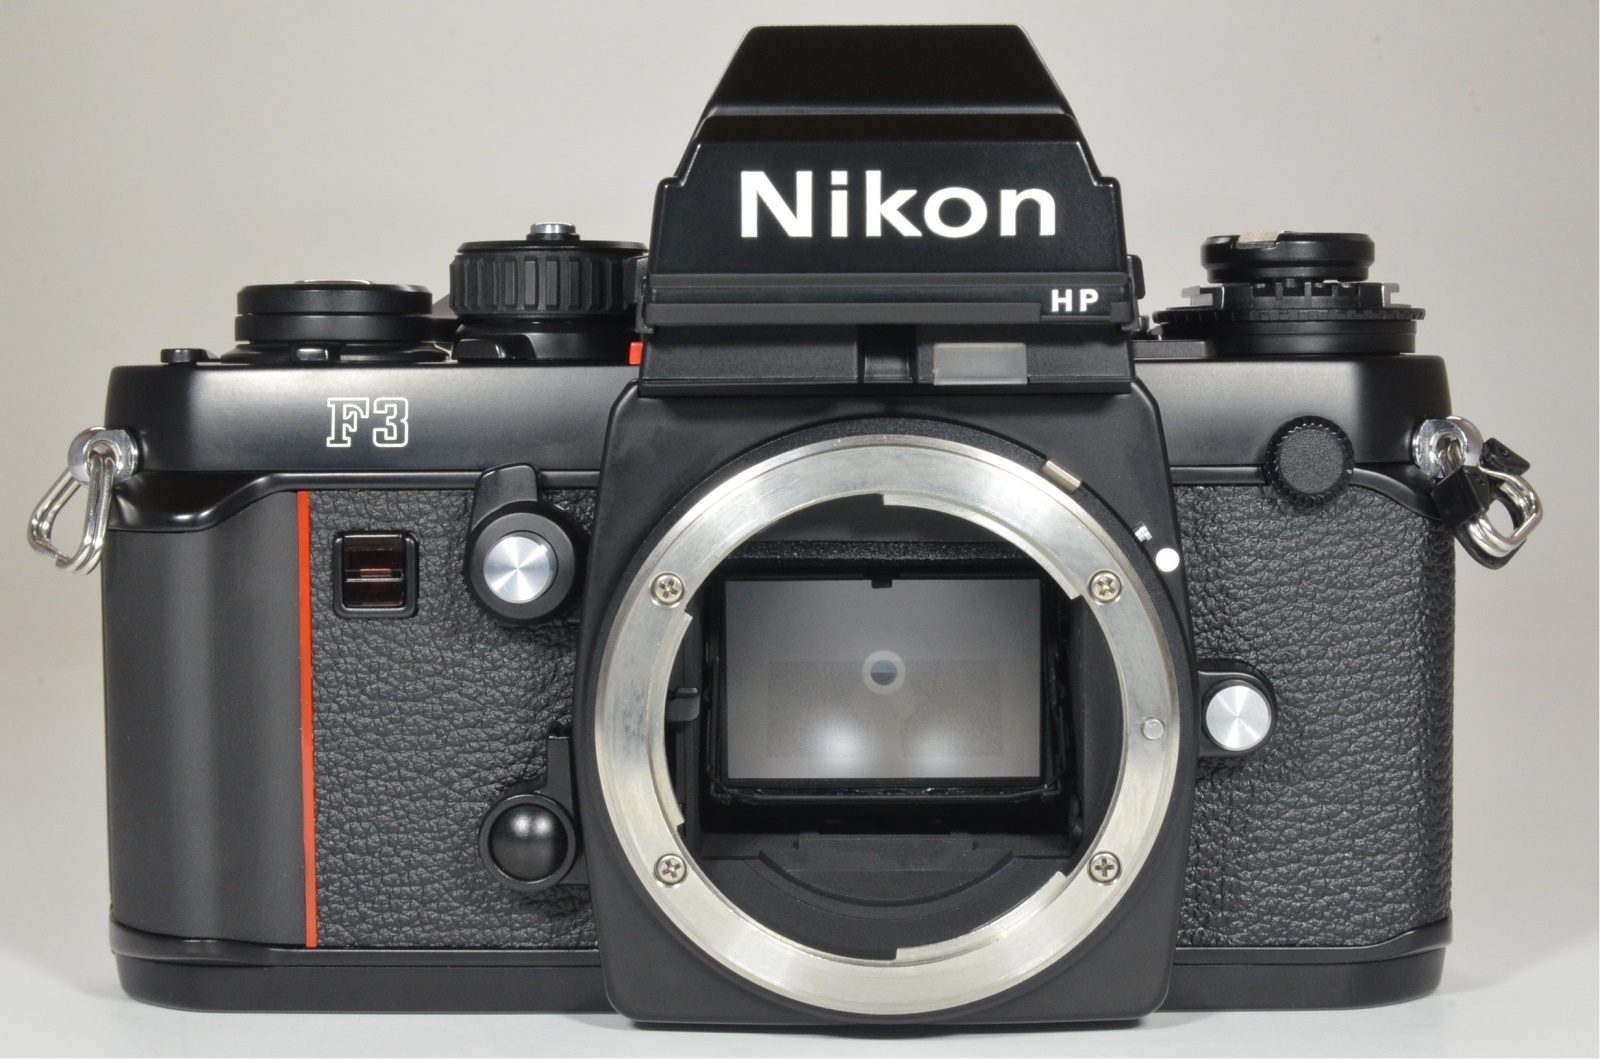 nikon f3 hp w/ nikkor 50mm f1.4 and 35-105mm f3.5-4.5 shooting tested